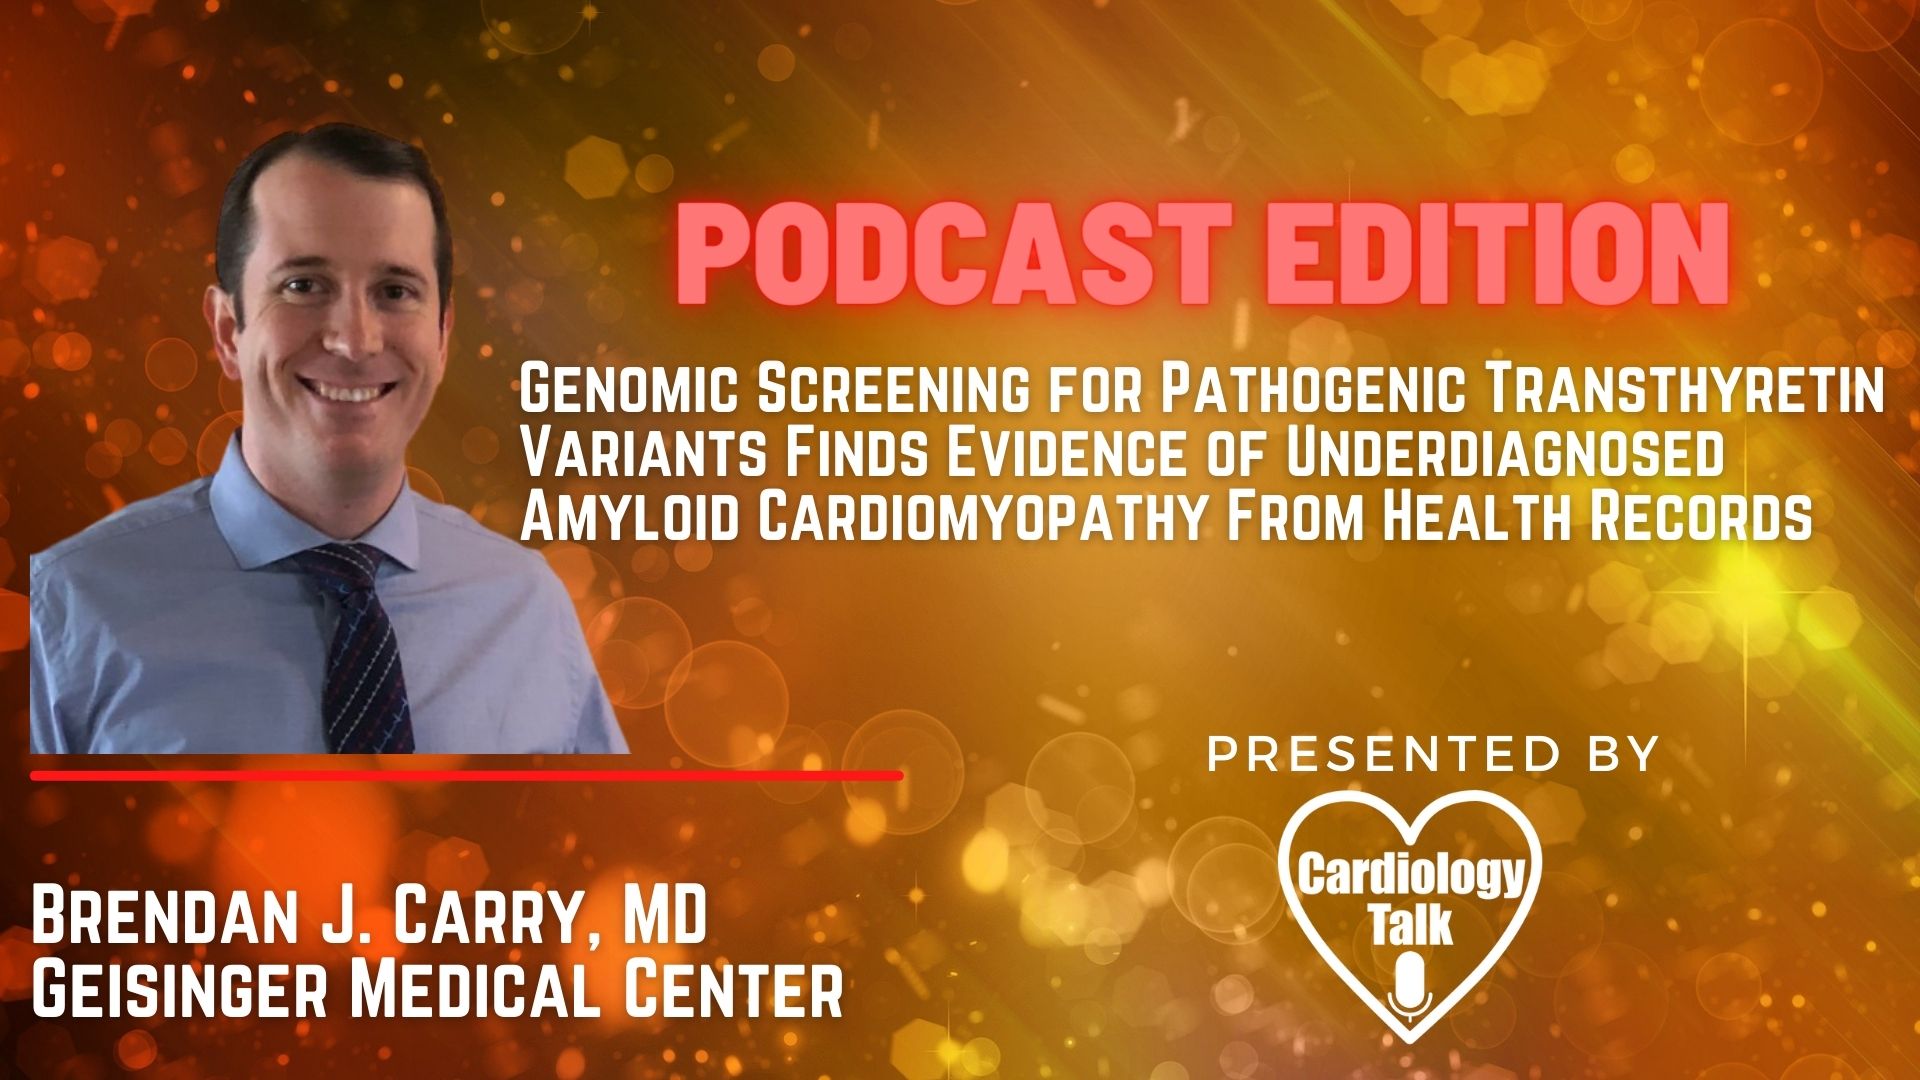 Podcast- Brendan J. Carry, MD- Genomic Screening for Pathogenic Transthyretin Variants Finds Evidence of Underdiagnosed Amyloid Cardiomyopathy From Health Records